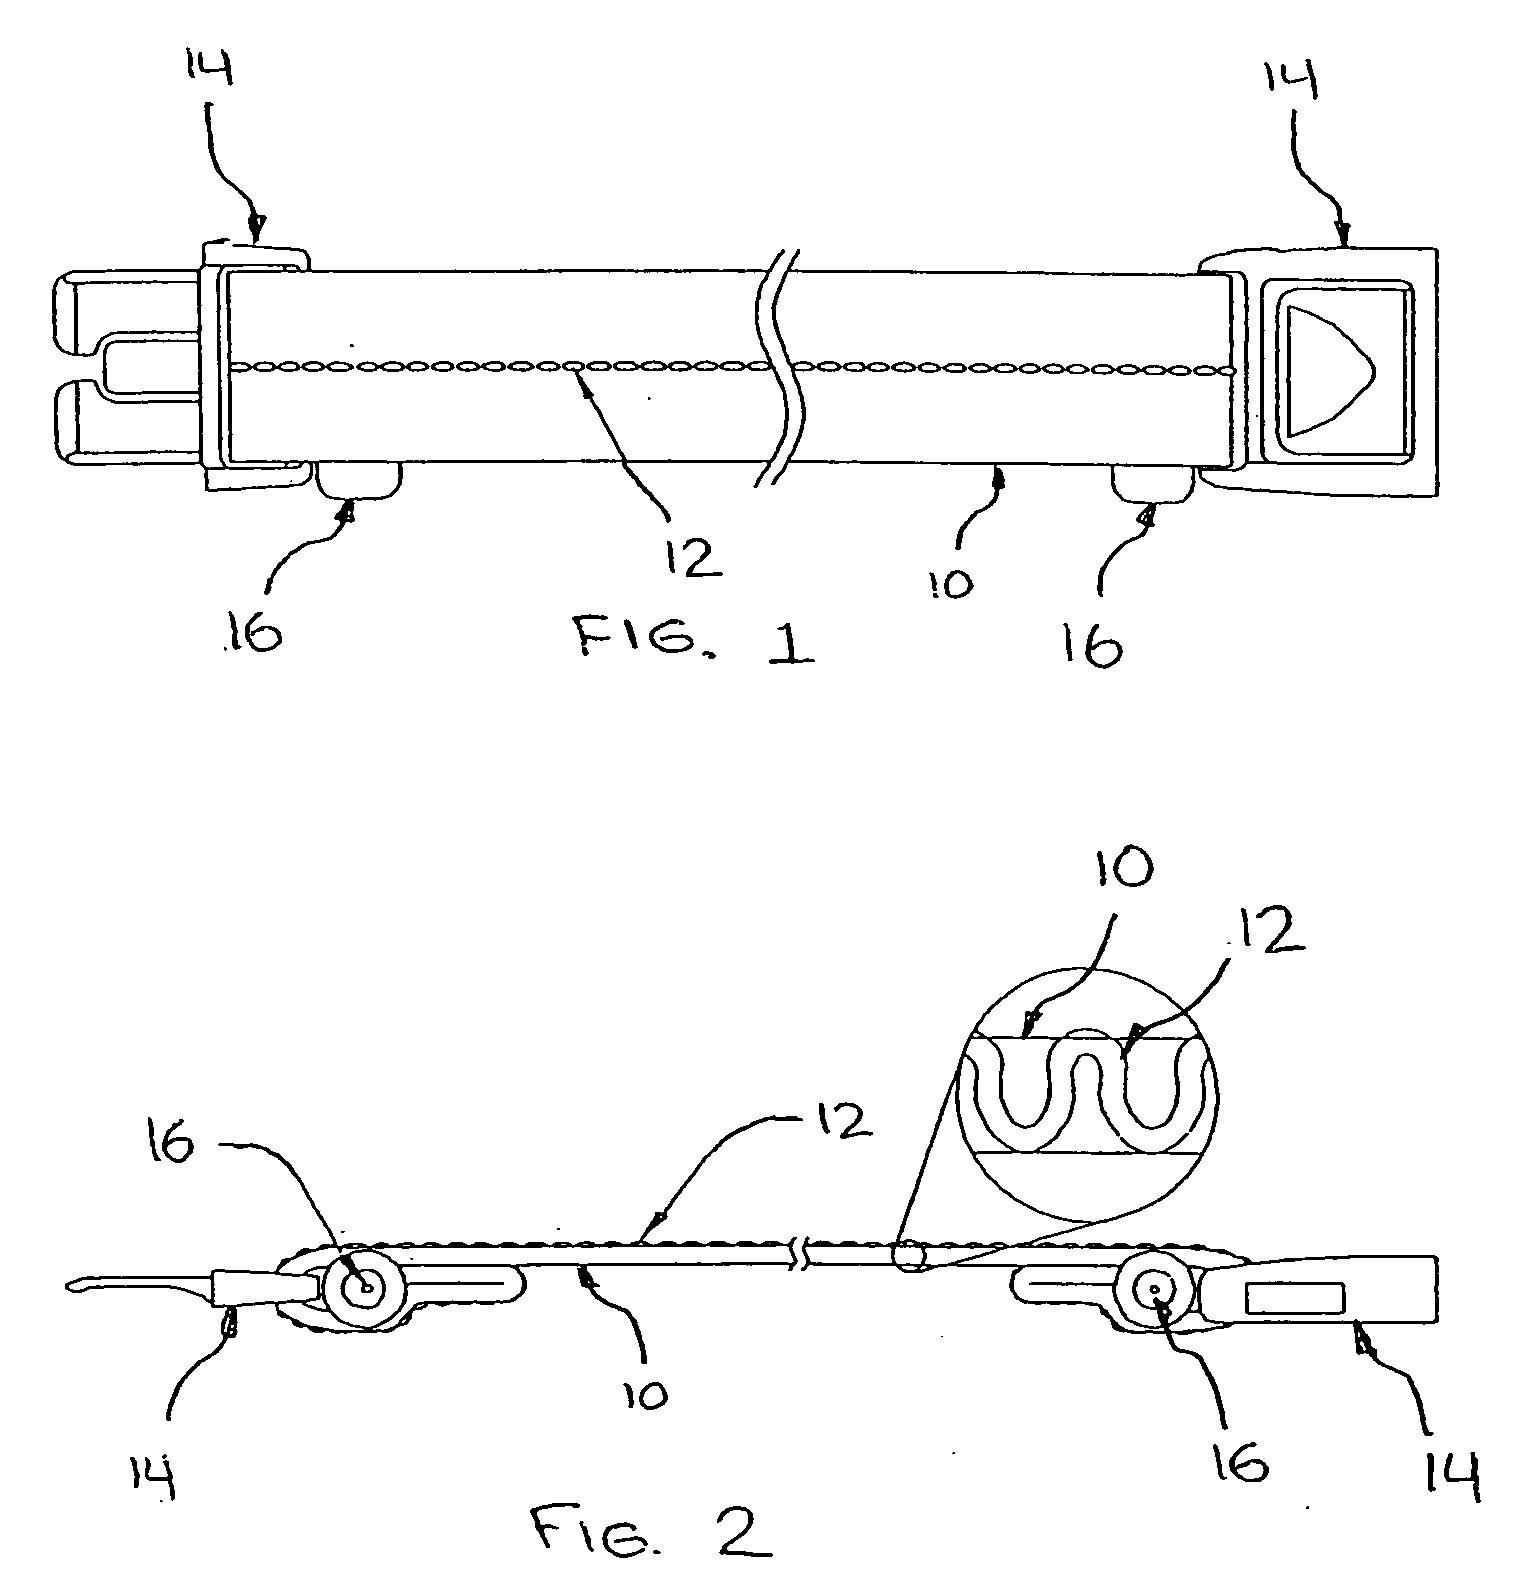 Reusable inductive transducer for measuring respiration